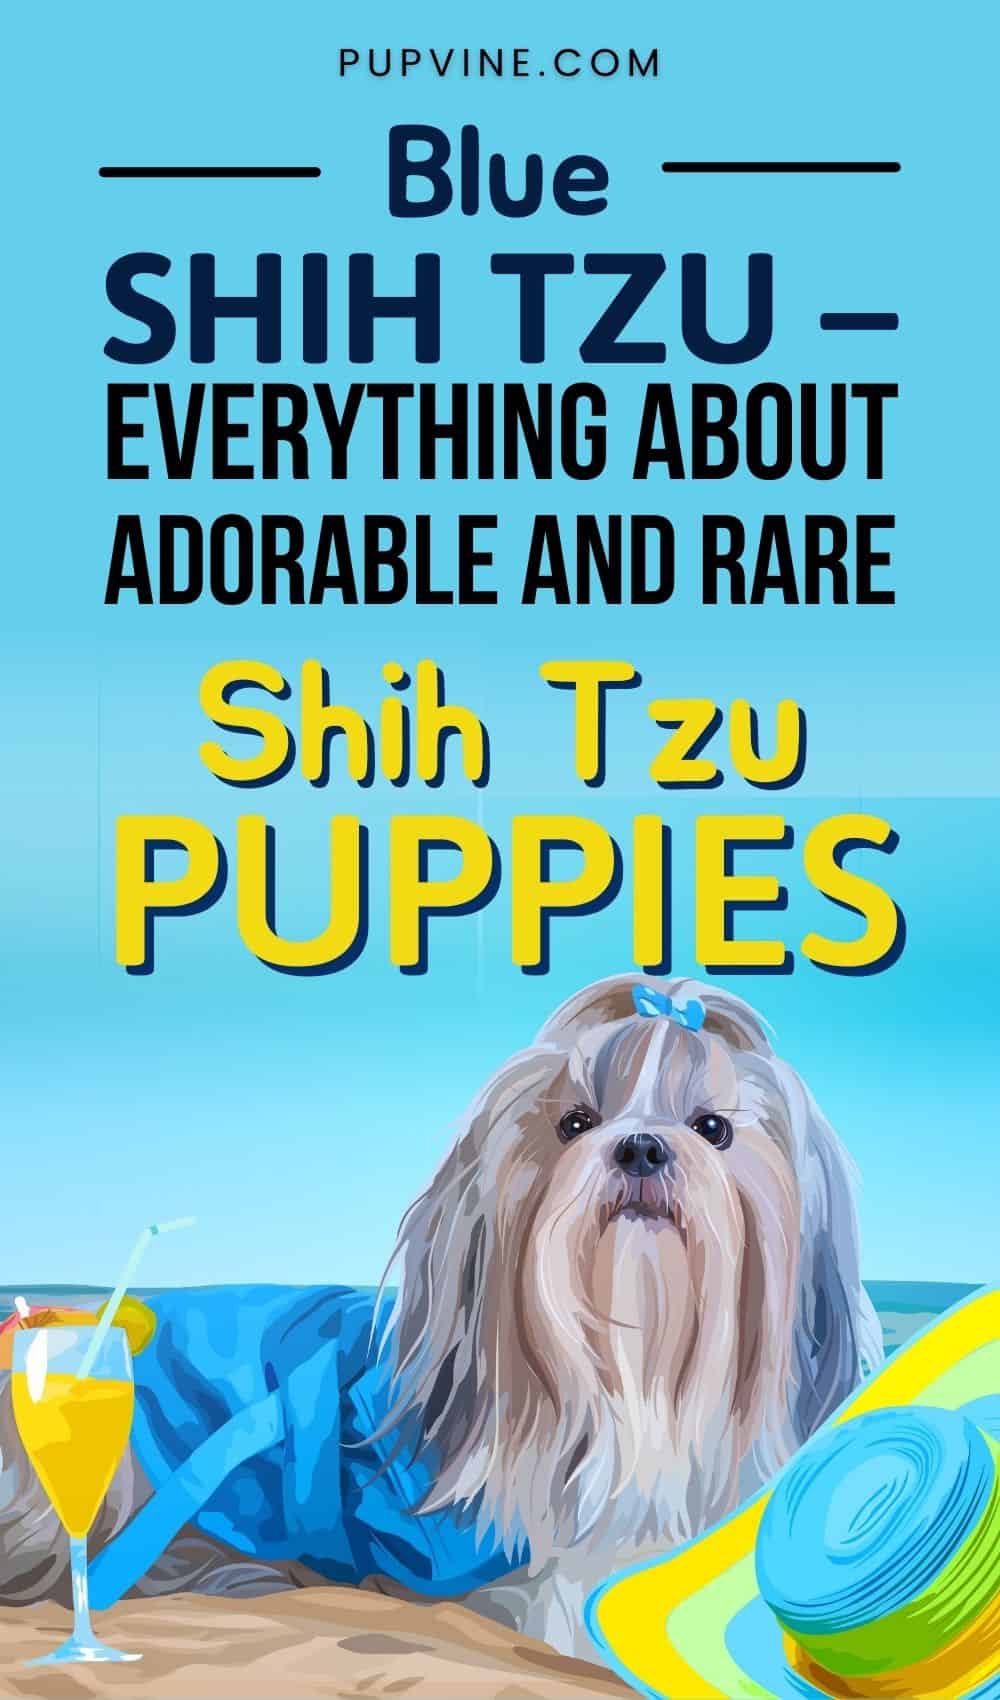 Blue Shih Tzu – Everything About Adorable And Rare Shih Tzu Puppies